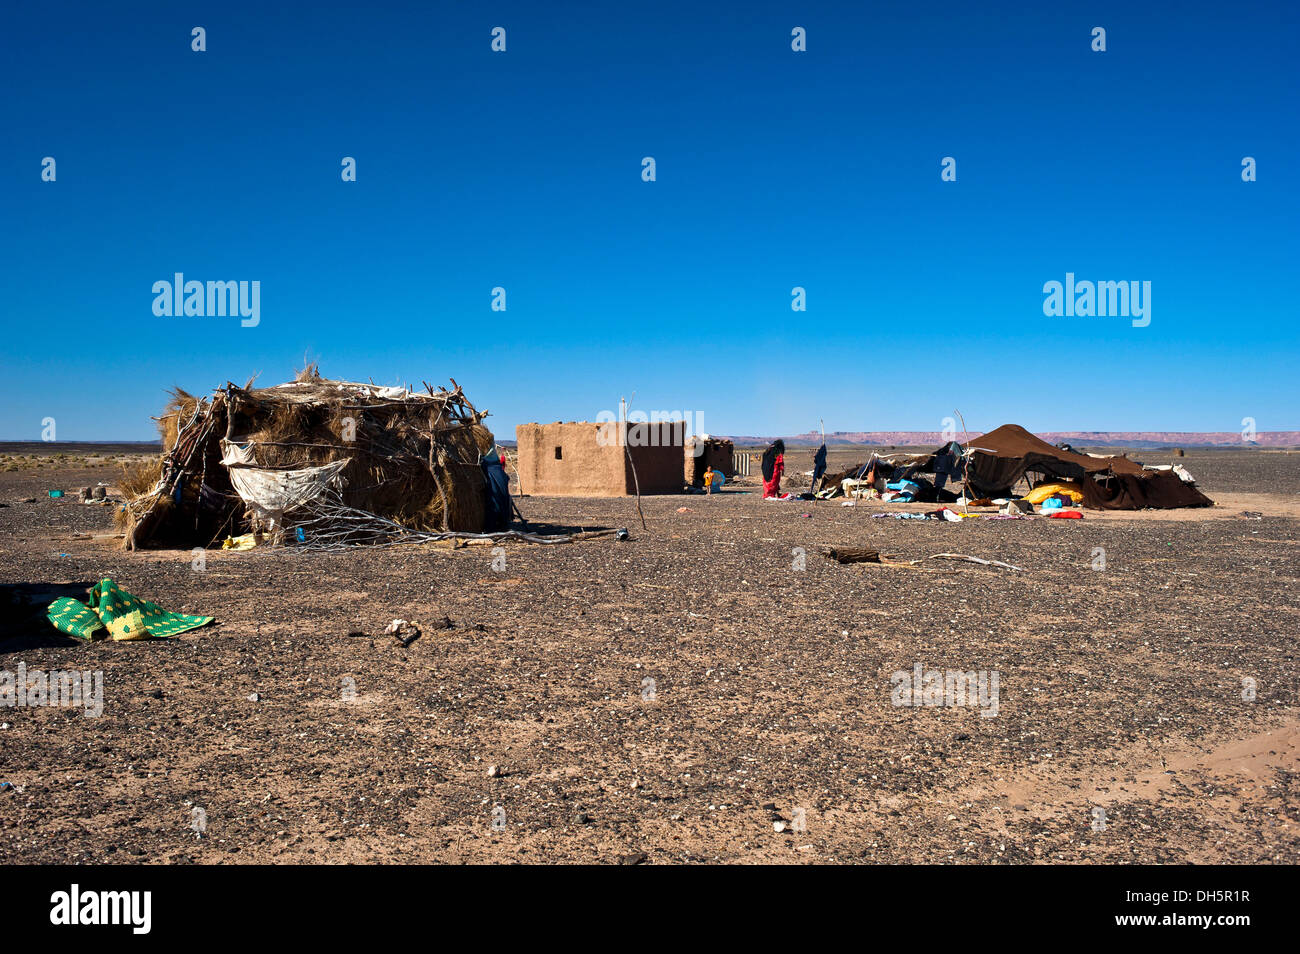 Nomad tent and dwellings of a nomadic family on a plateau, stony desert, hamada, Erg Chebbi, Southern Morocco, Morocco, Africa Stock Photo